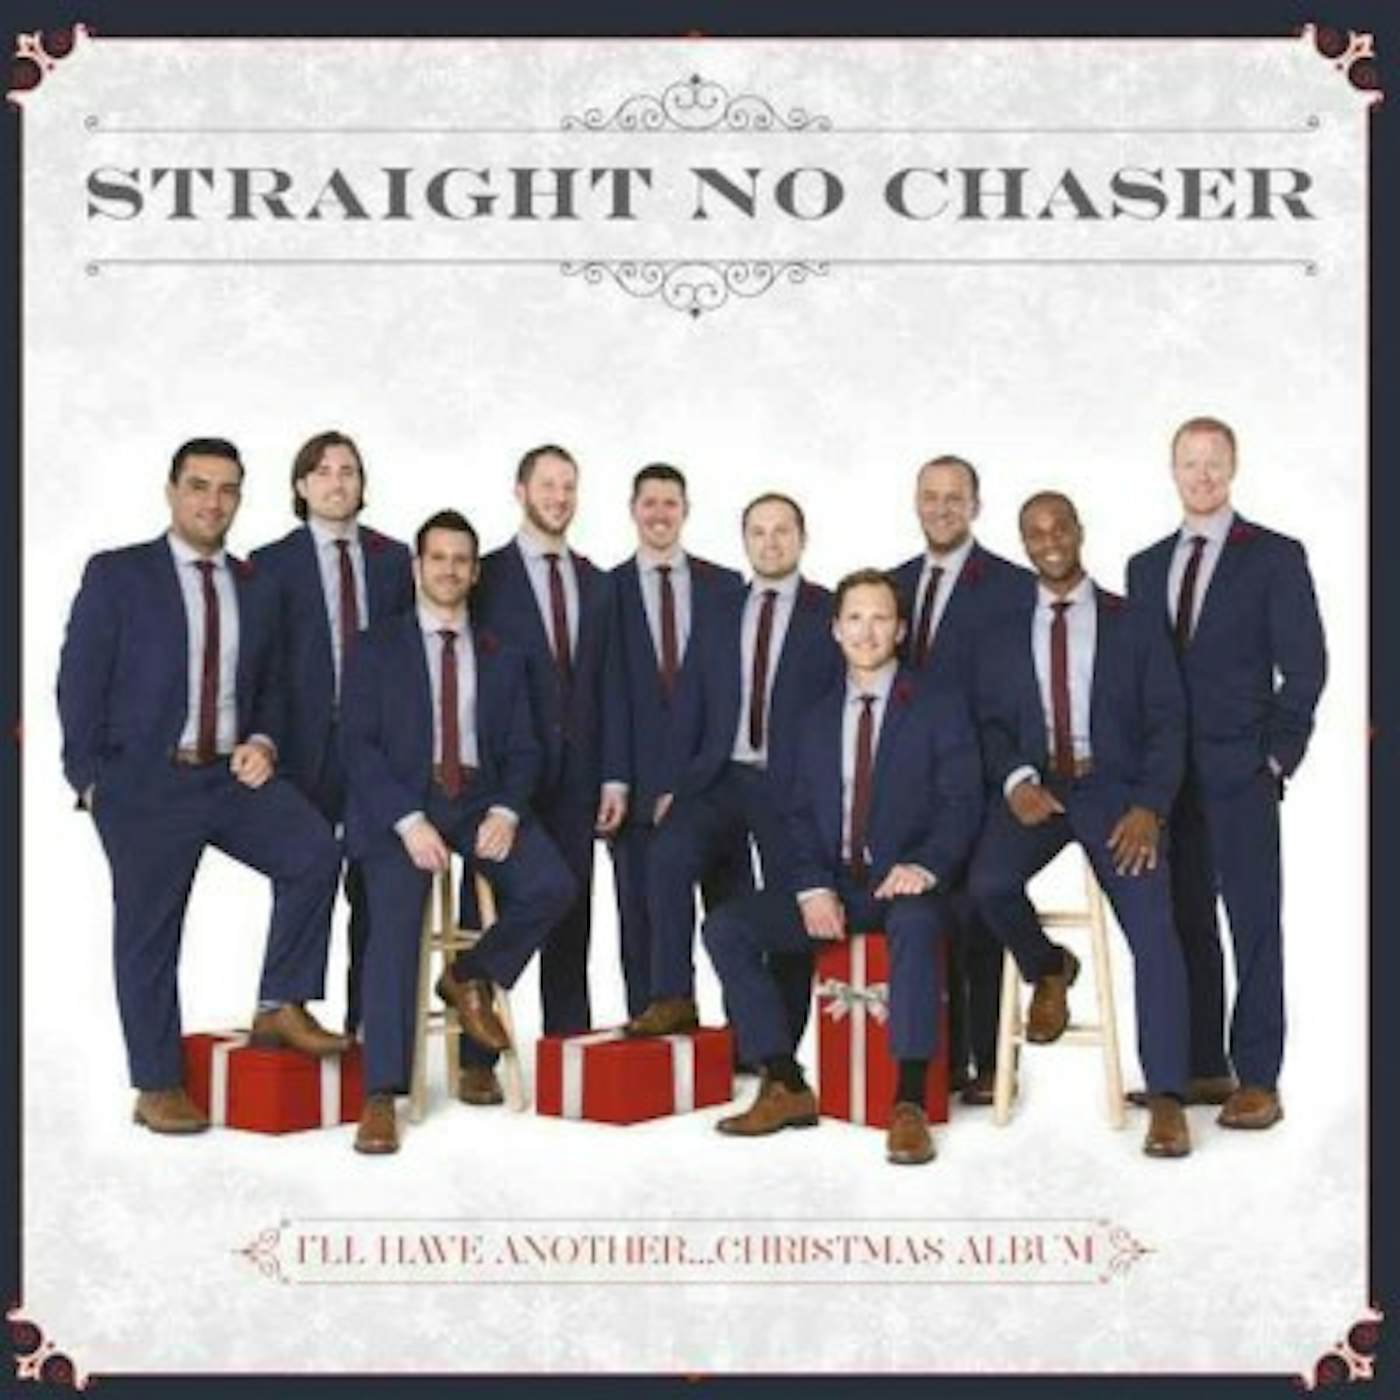 Straight No Chaser I'll Have Another: Christmas Album CD